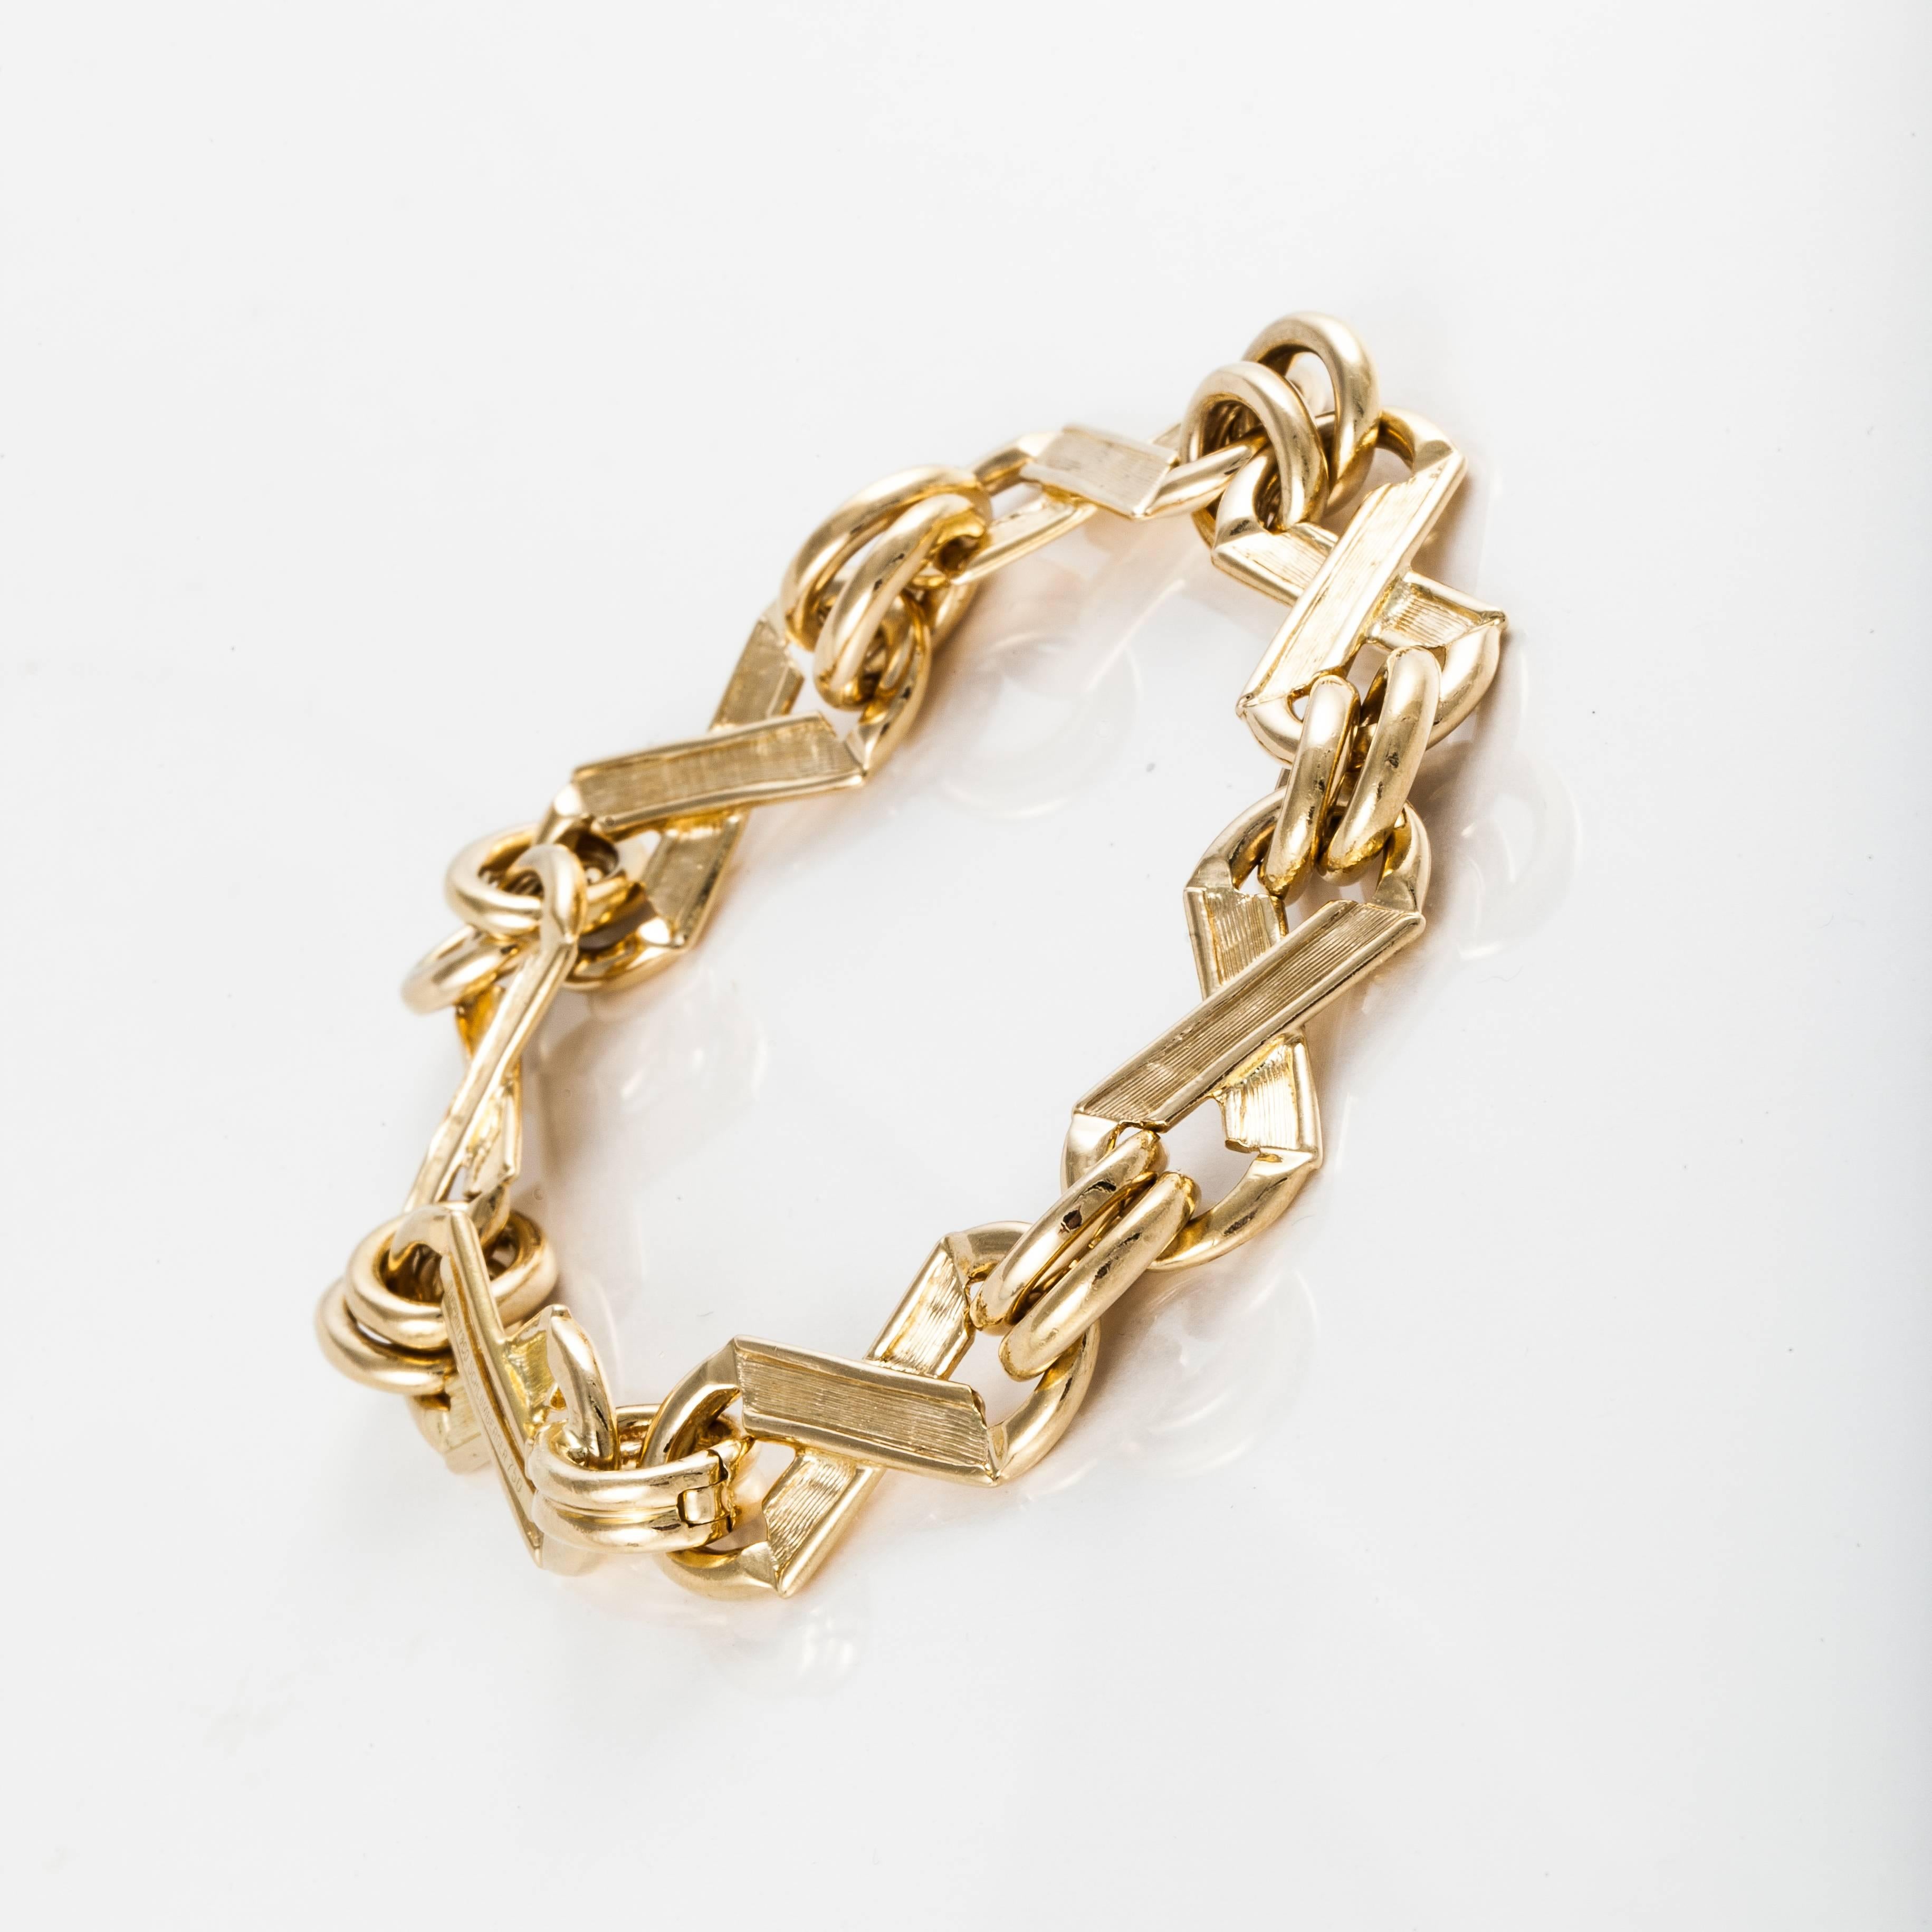 Classic bracelet by Tiffany & Co. Schlumberger in 18K yellow gold with X's and O's in both a brushed and high polish finish.  The bracelet is marked 